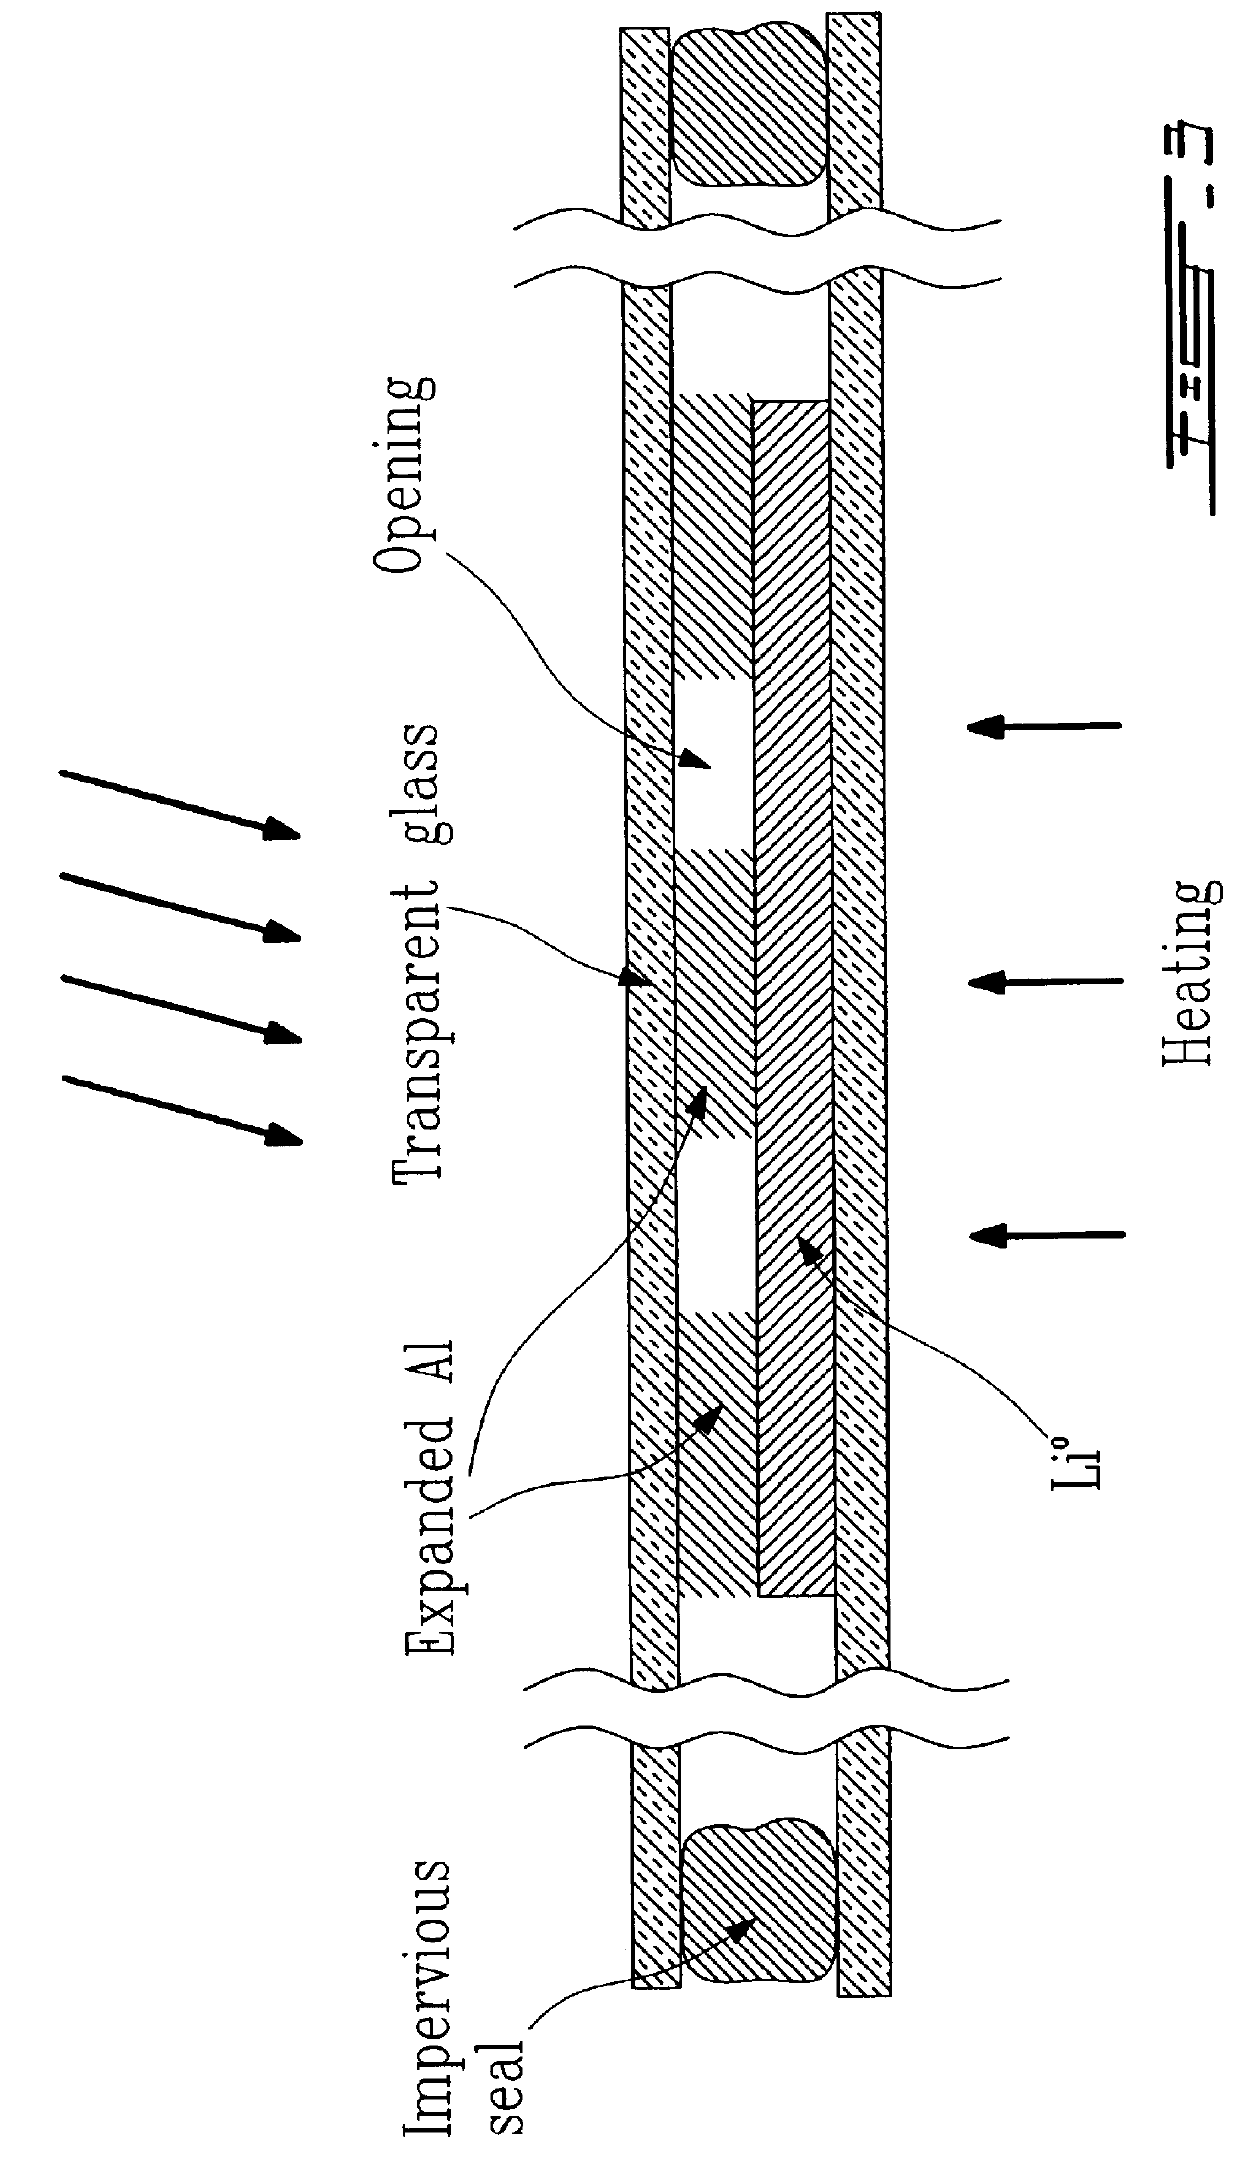 Alloyed and dense anode sheet with local stress relaxation